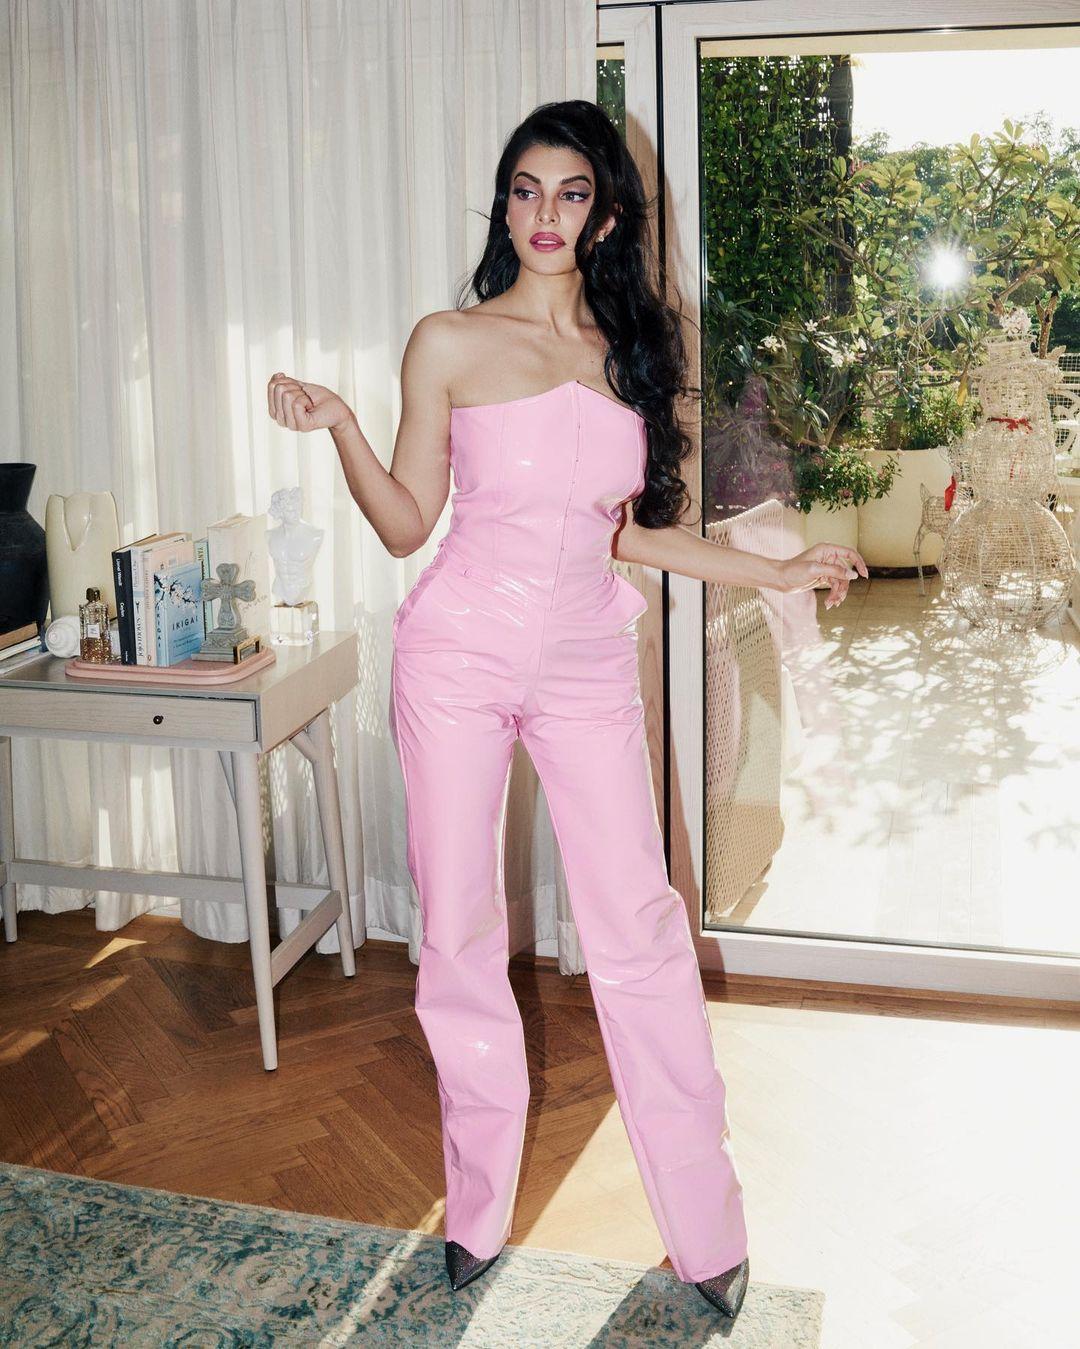 The ensemble of choice showcased her penchant for both style and comfort. A one-piece marvel, the jumpsuit showcased a corset-like upper portion that gradually extended into a straight-cut pant silhouette